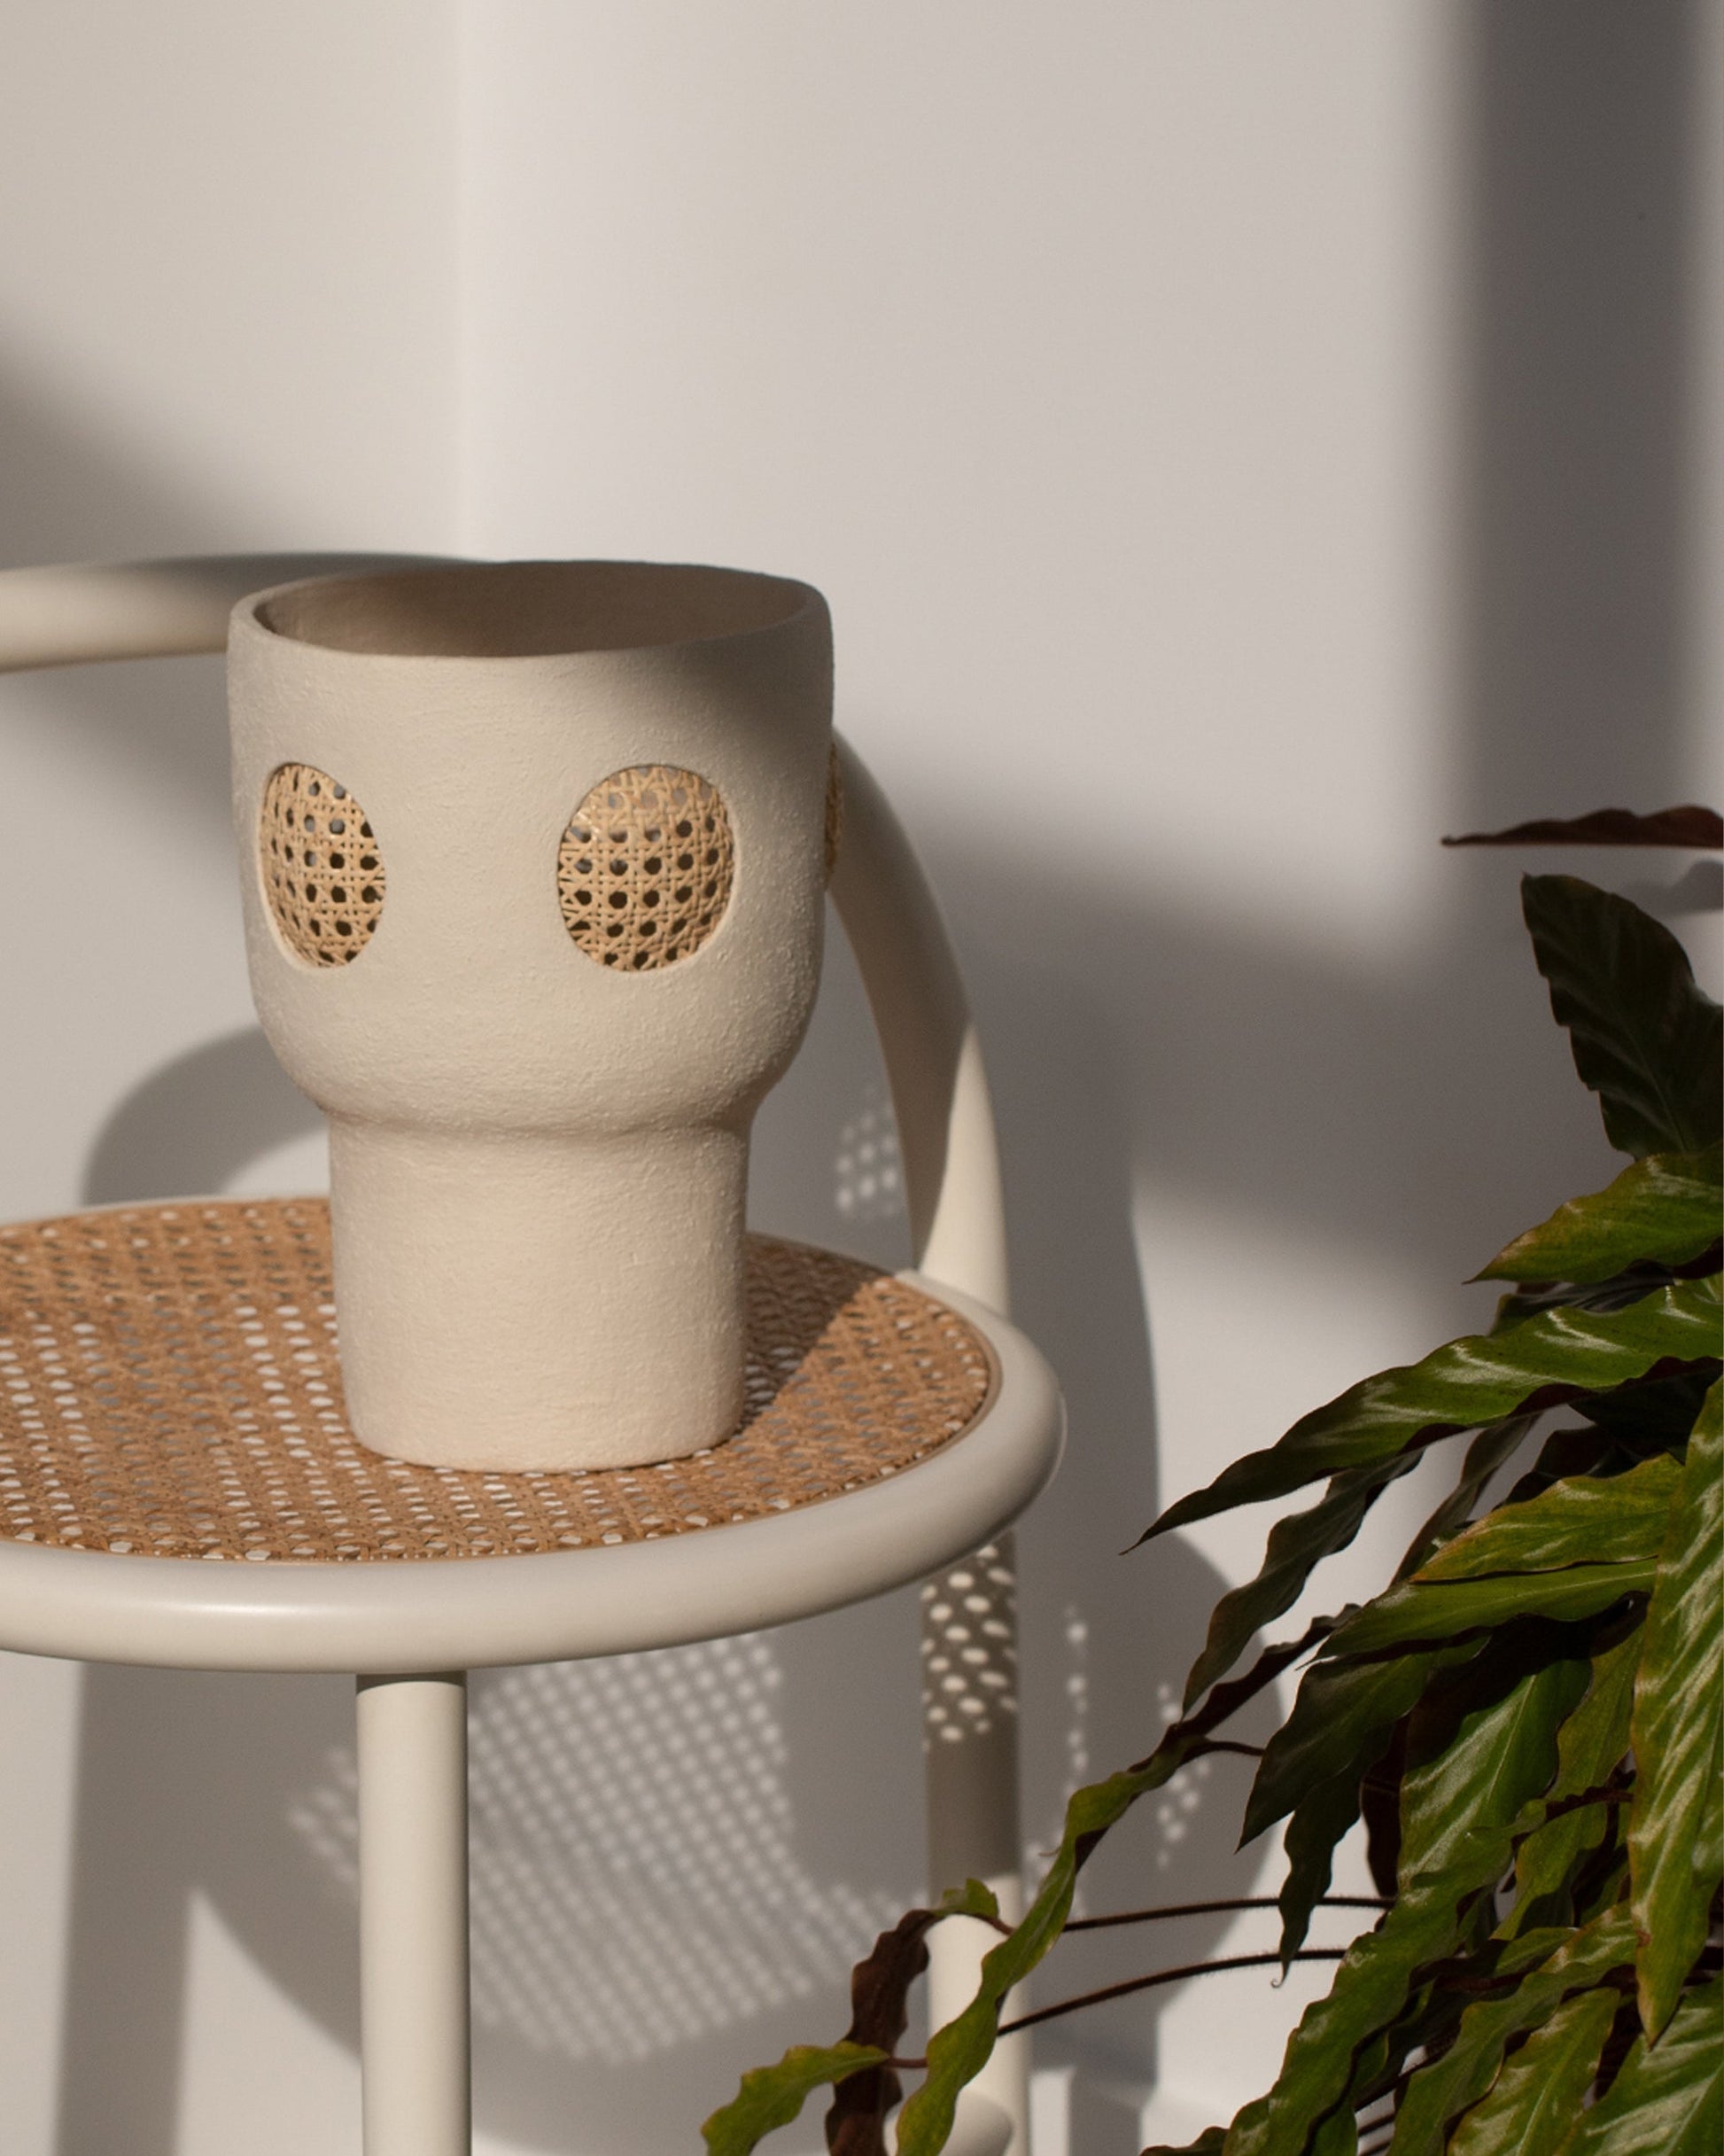 Styled image featuring Stephanie Phillips Rattan Vessel on stool.